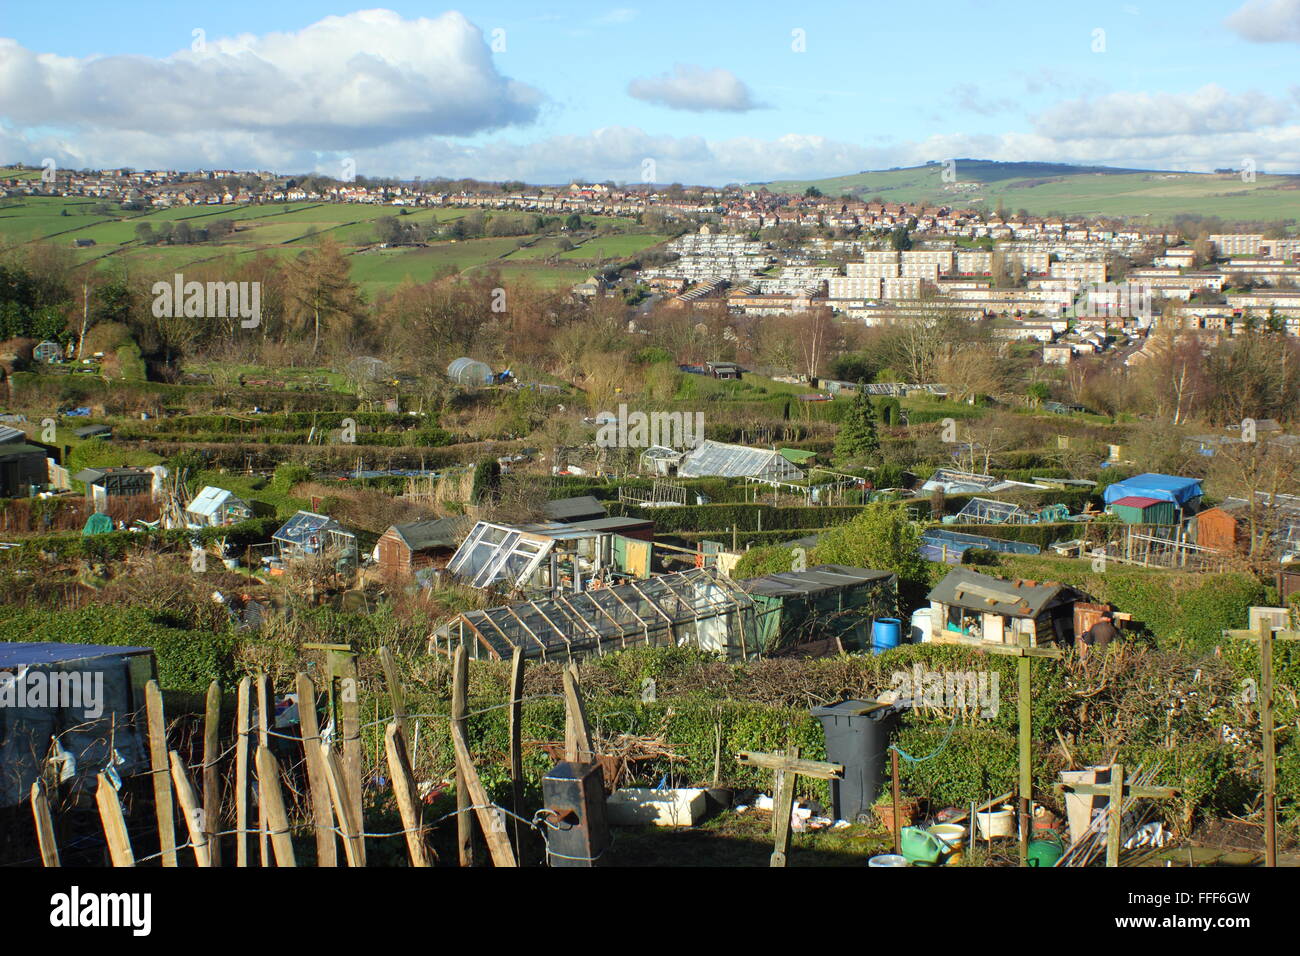 Allotments on a hillside in Sheffield, South Yorkshire looking to the city's rural fringe, England UK Stock Photo